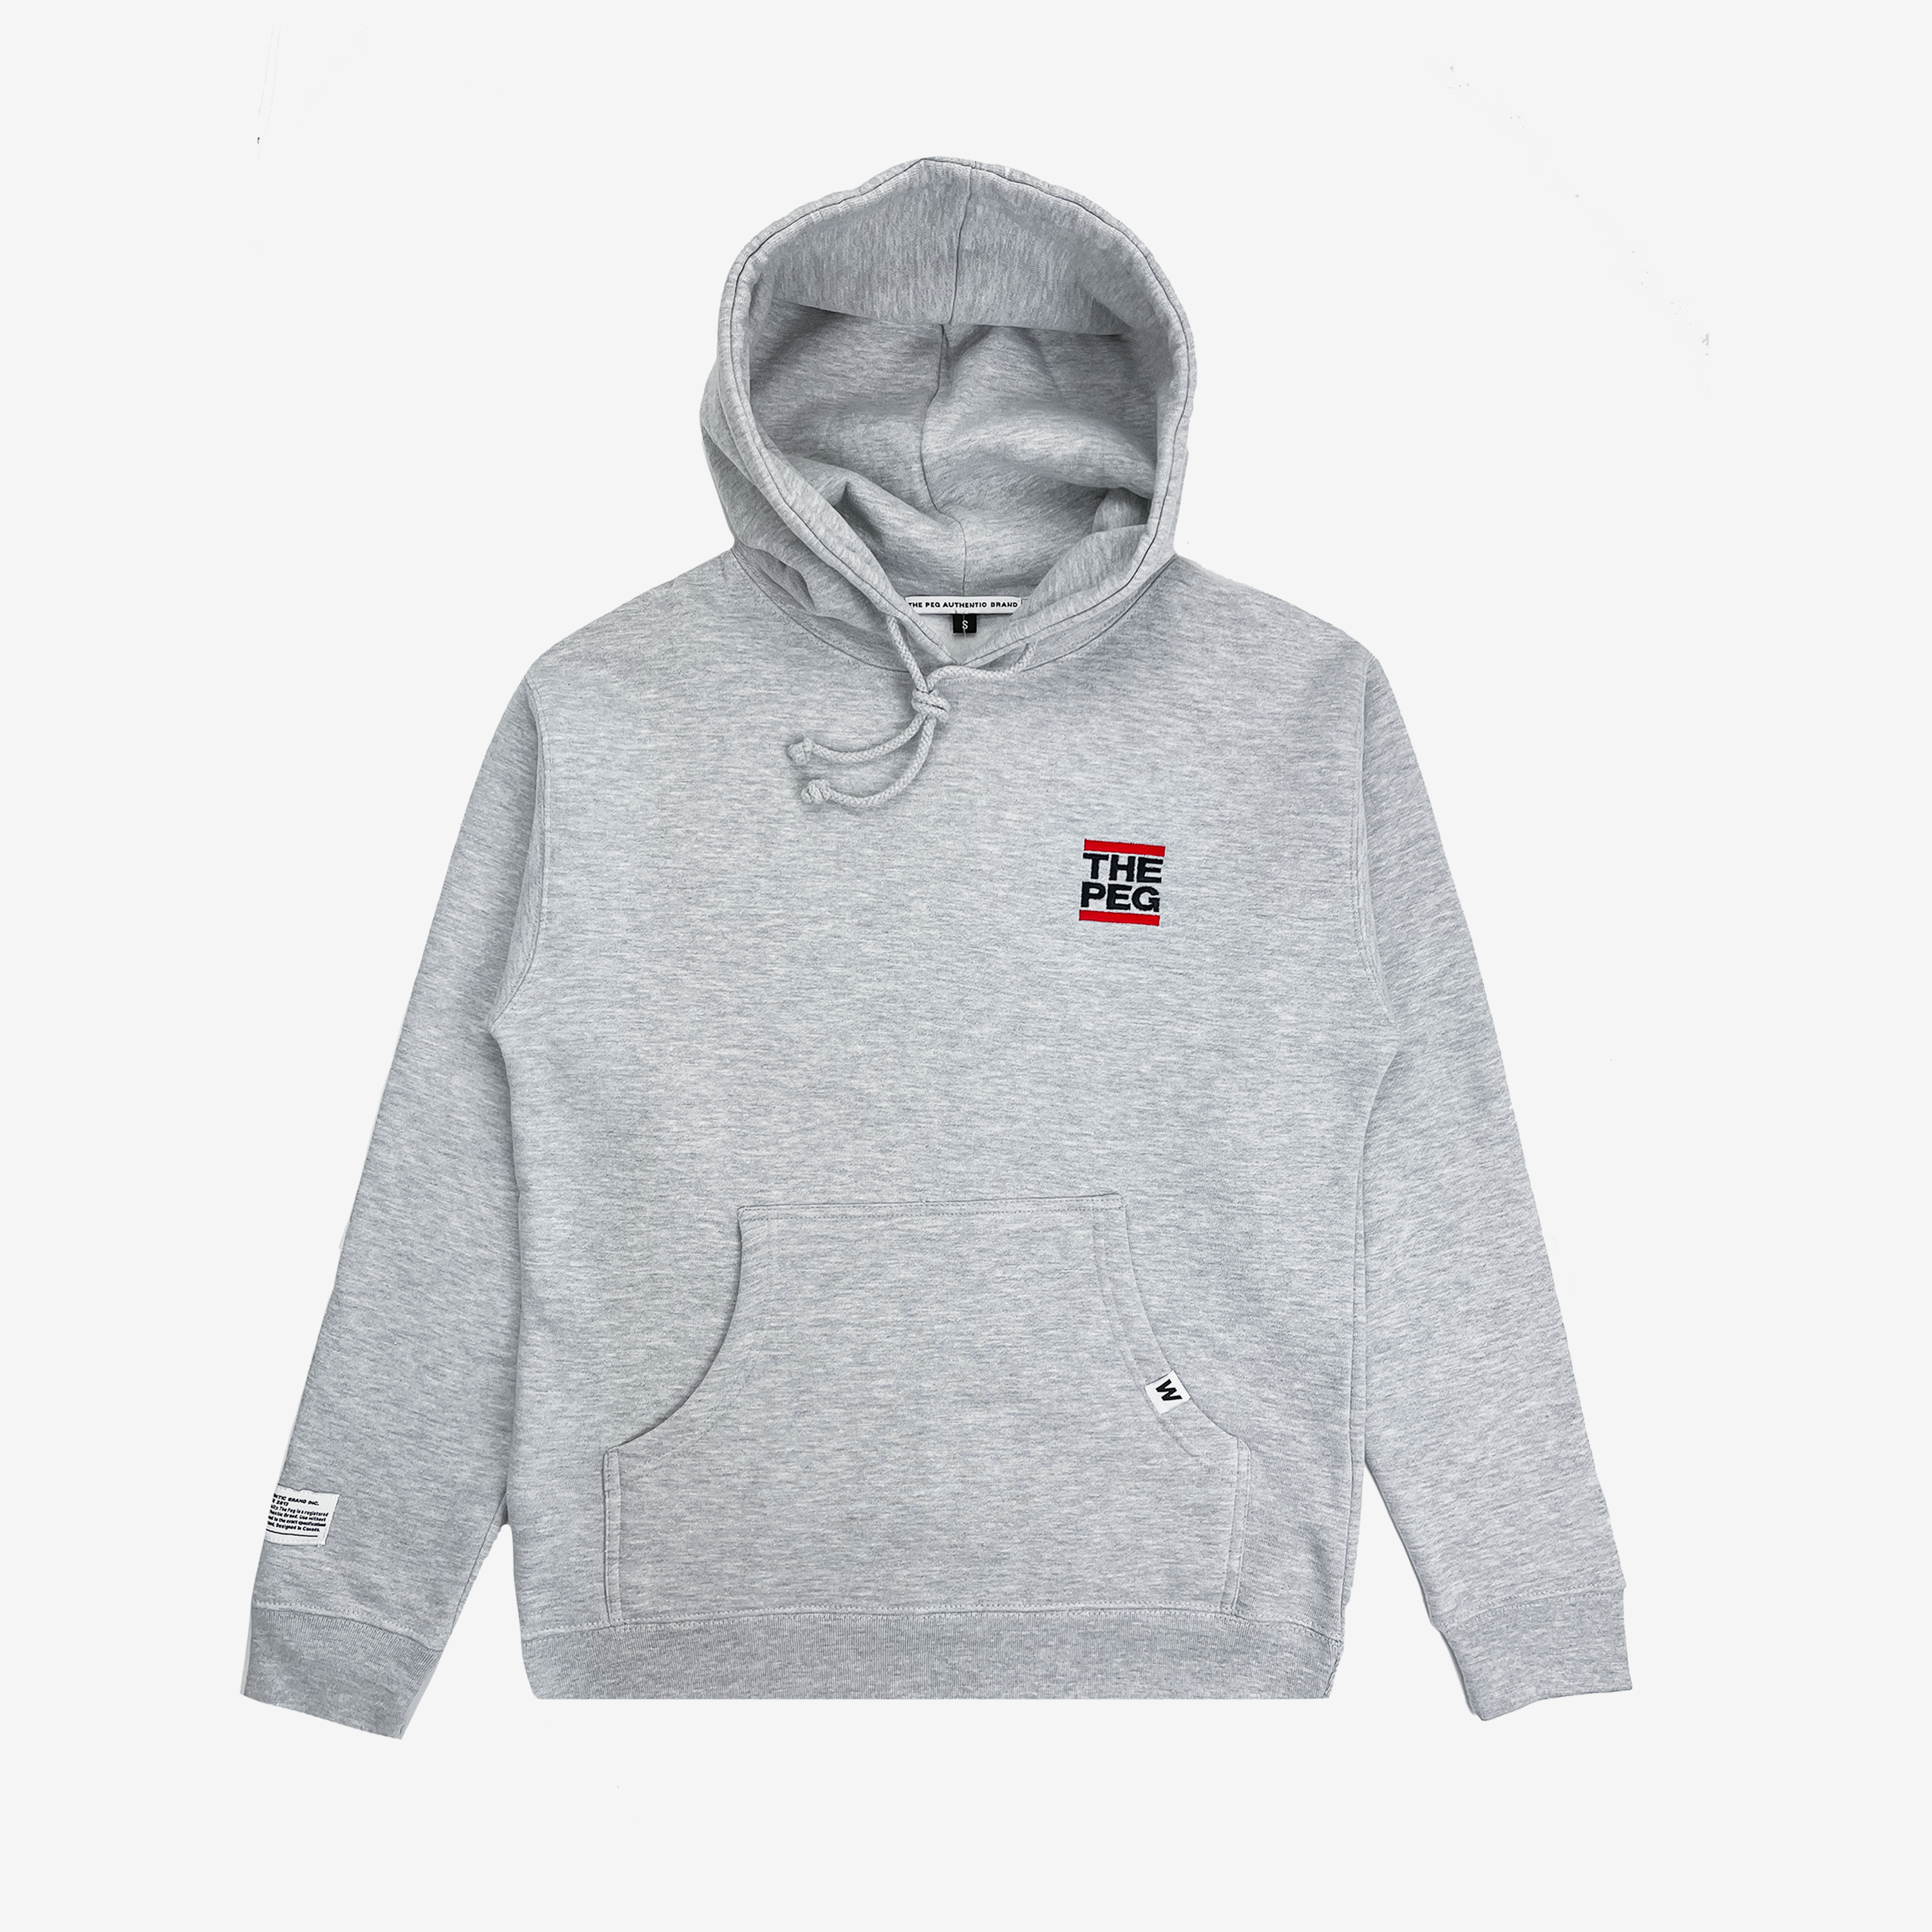 Heavy Peg (Heather - Embroidered Grey) Brand Hoodie Pre The Premium Order: Authentic Weight